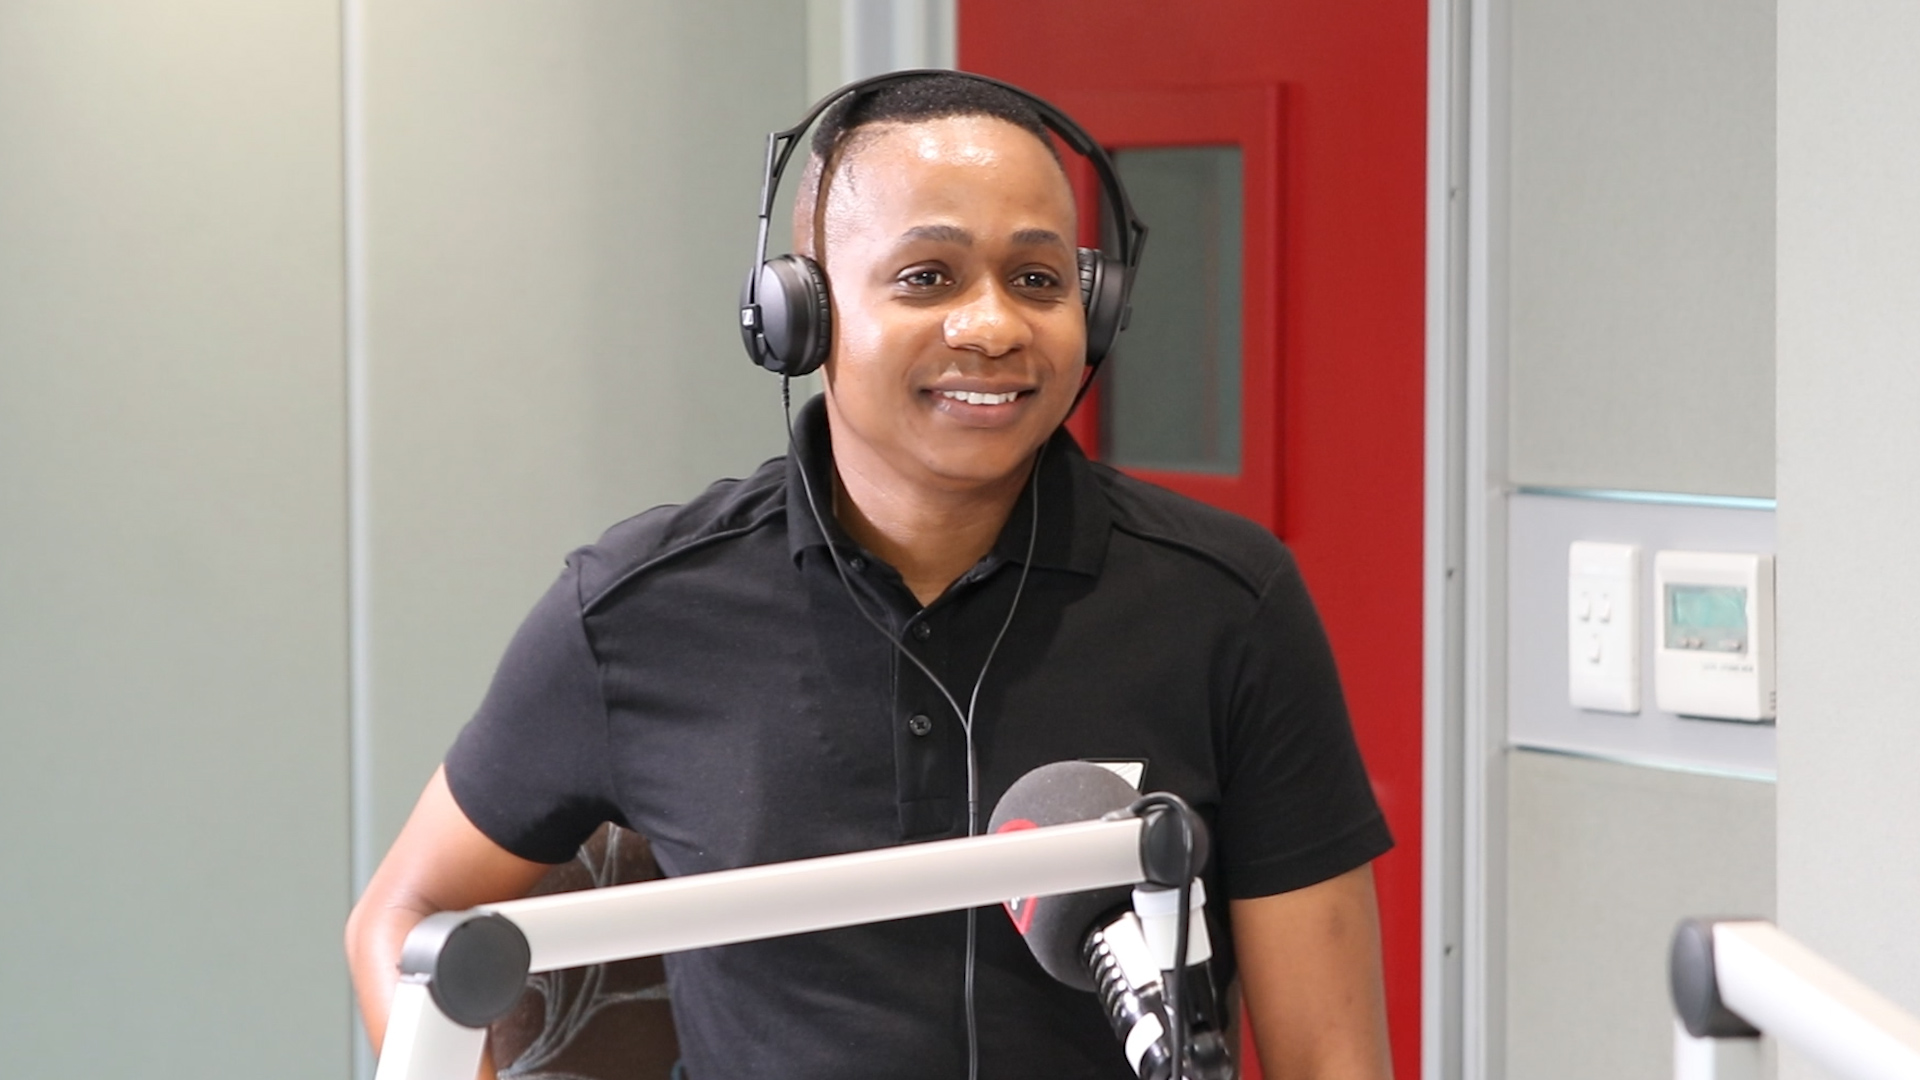 Spiritual Medium, Tebogo Mfete returns to follow up on his previous readings with the listeners